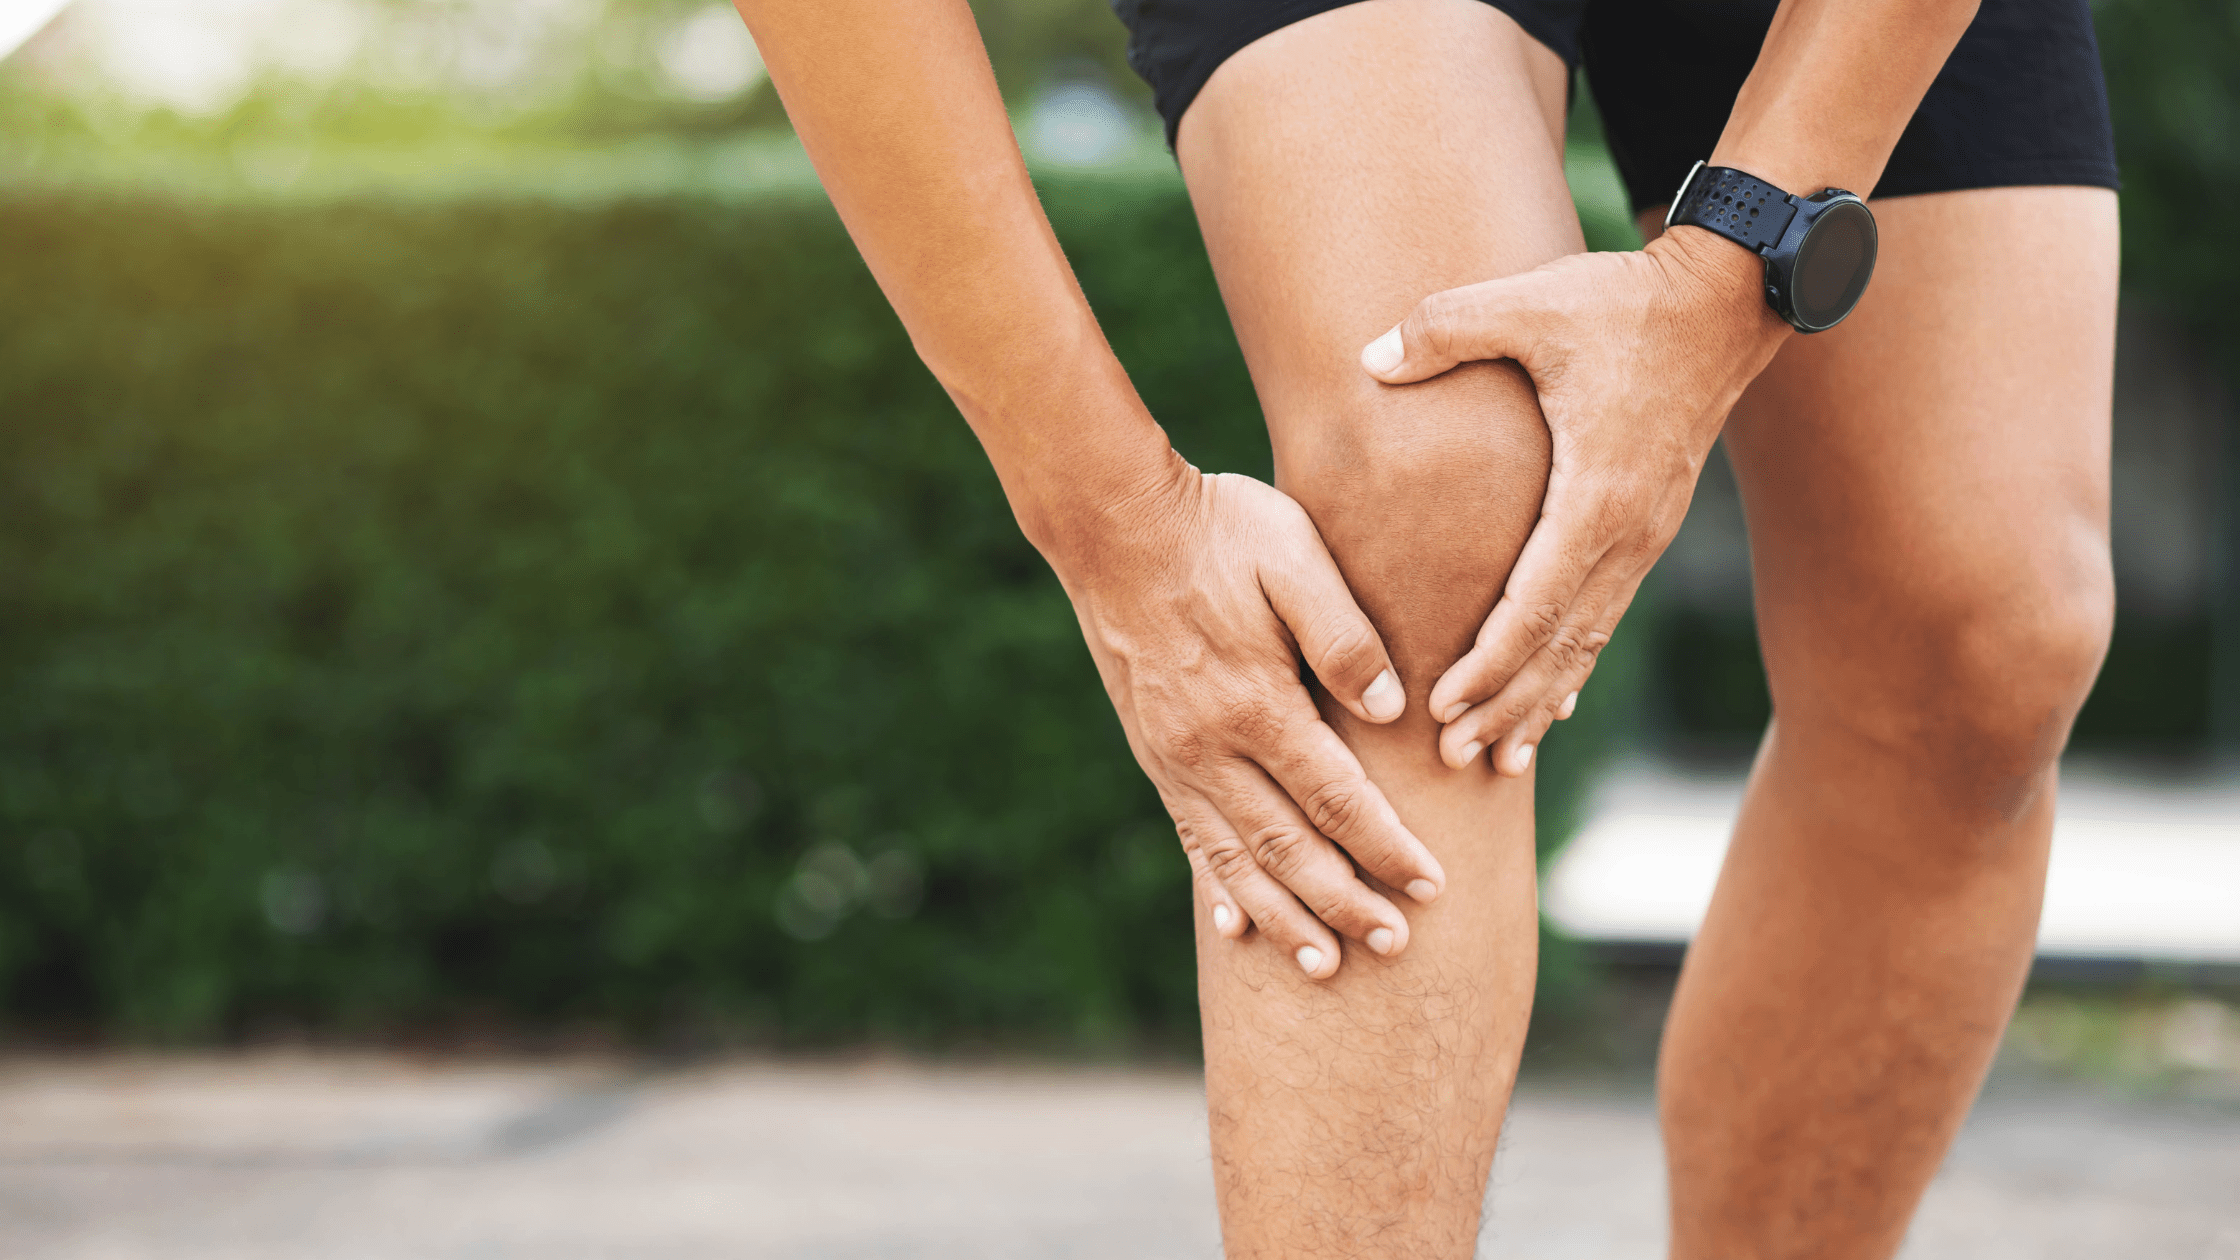 ACL repair and ACL reconstruction, compare the top surgical treatment options for a torn ACL.